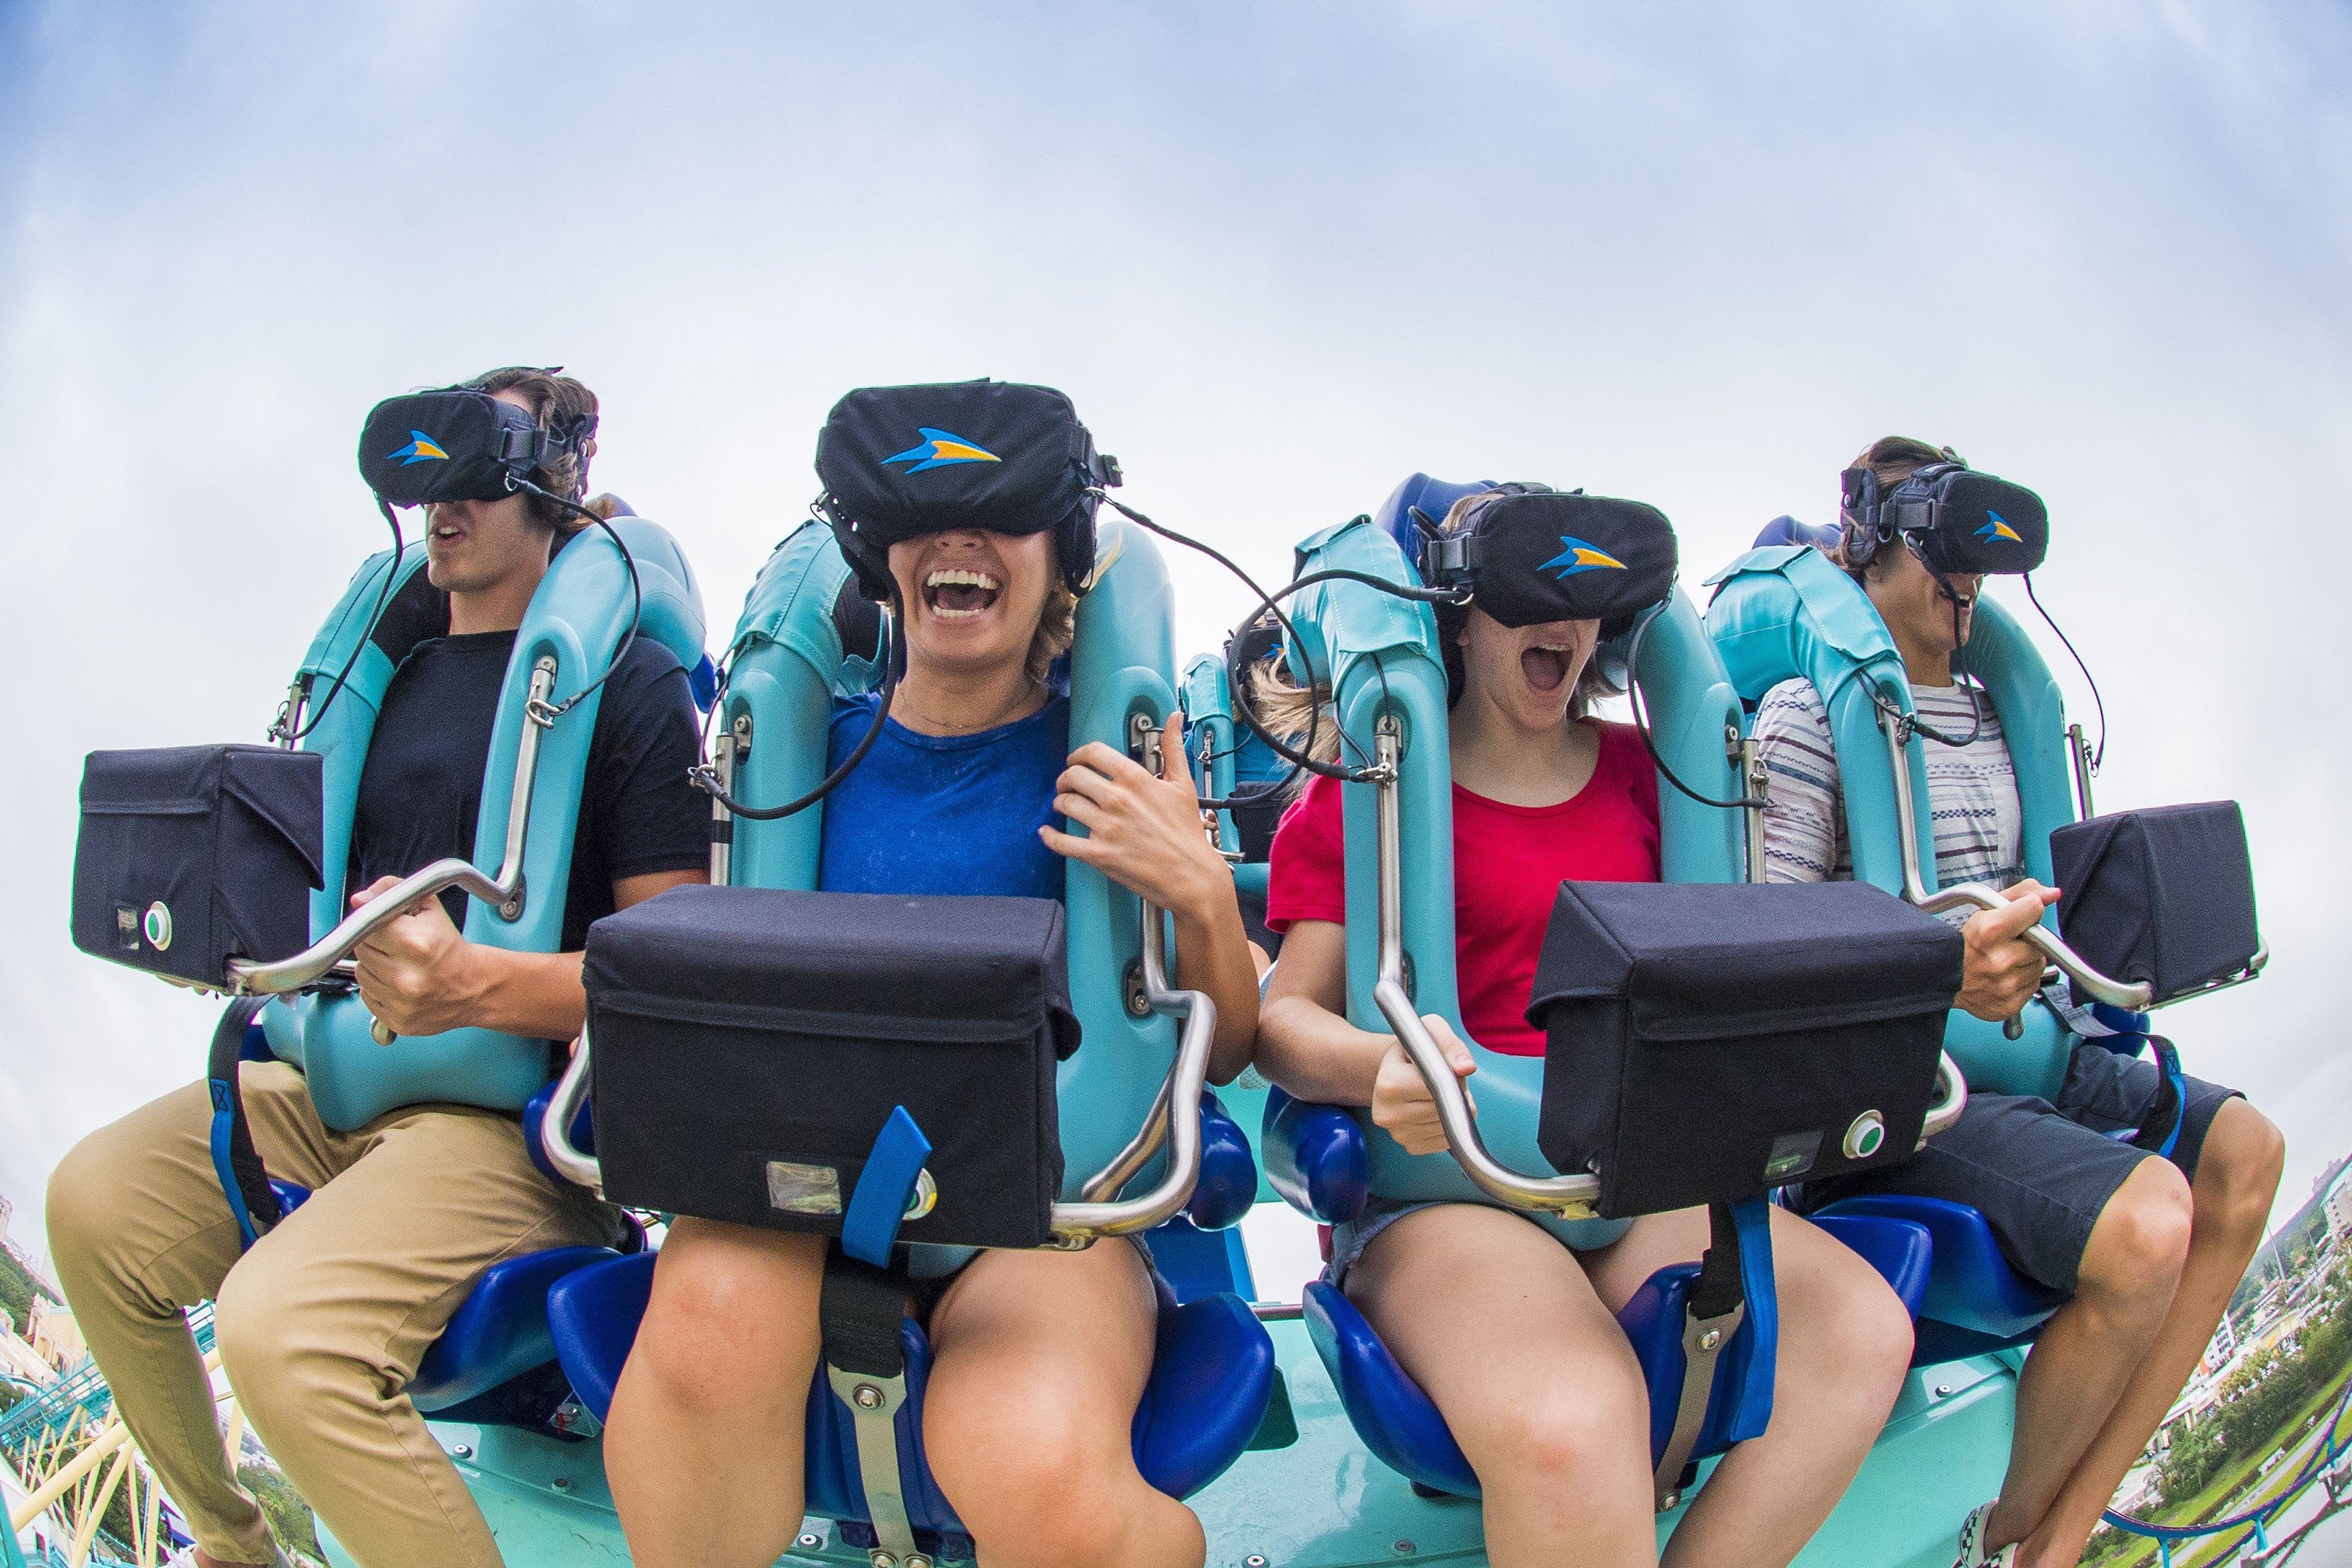 As the “Kraken” roller coaster speeds through a loop and turns upside down, virtual reality headsets send the riders on an undersea adventure, at SeaWorld Orlando in Florida. Photo: TNS